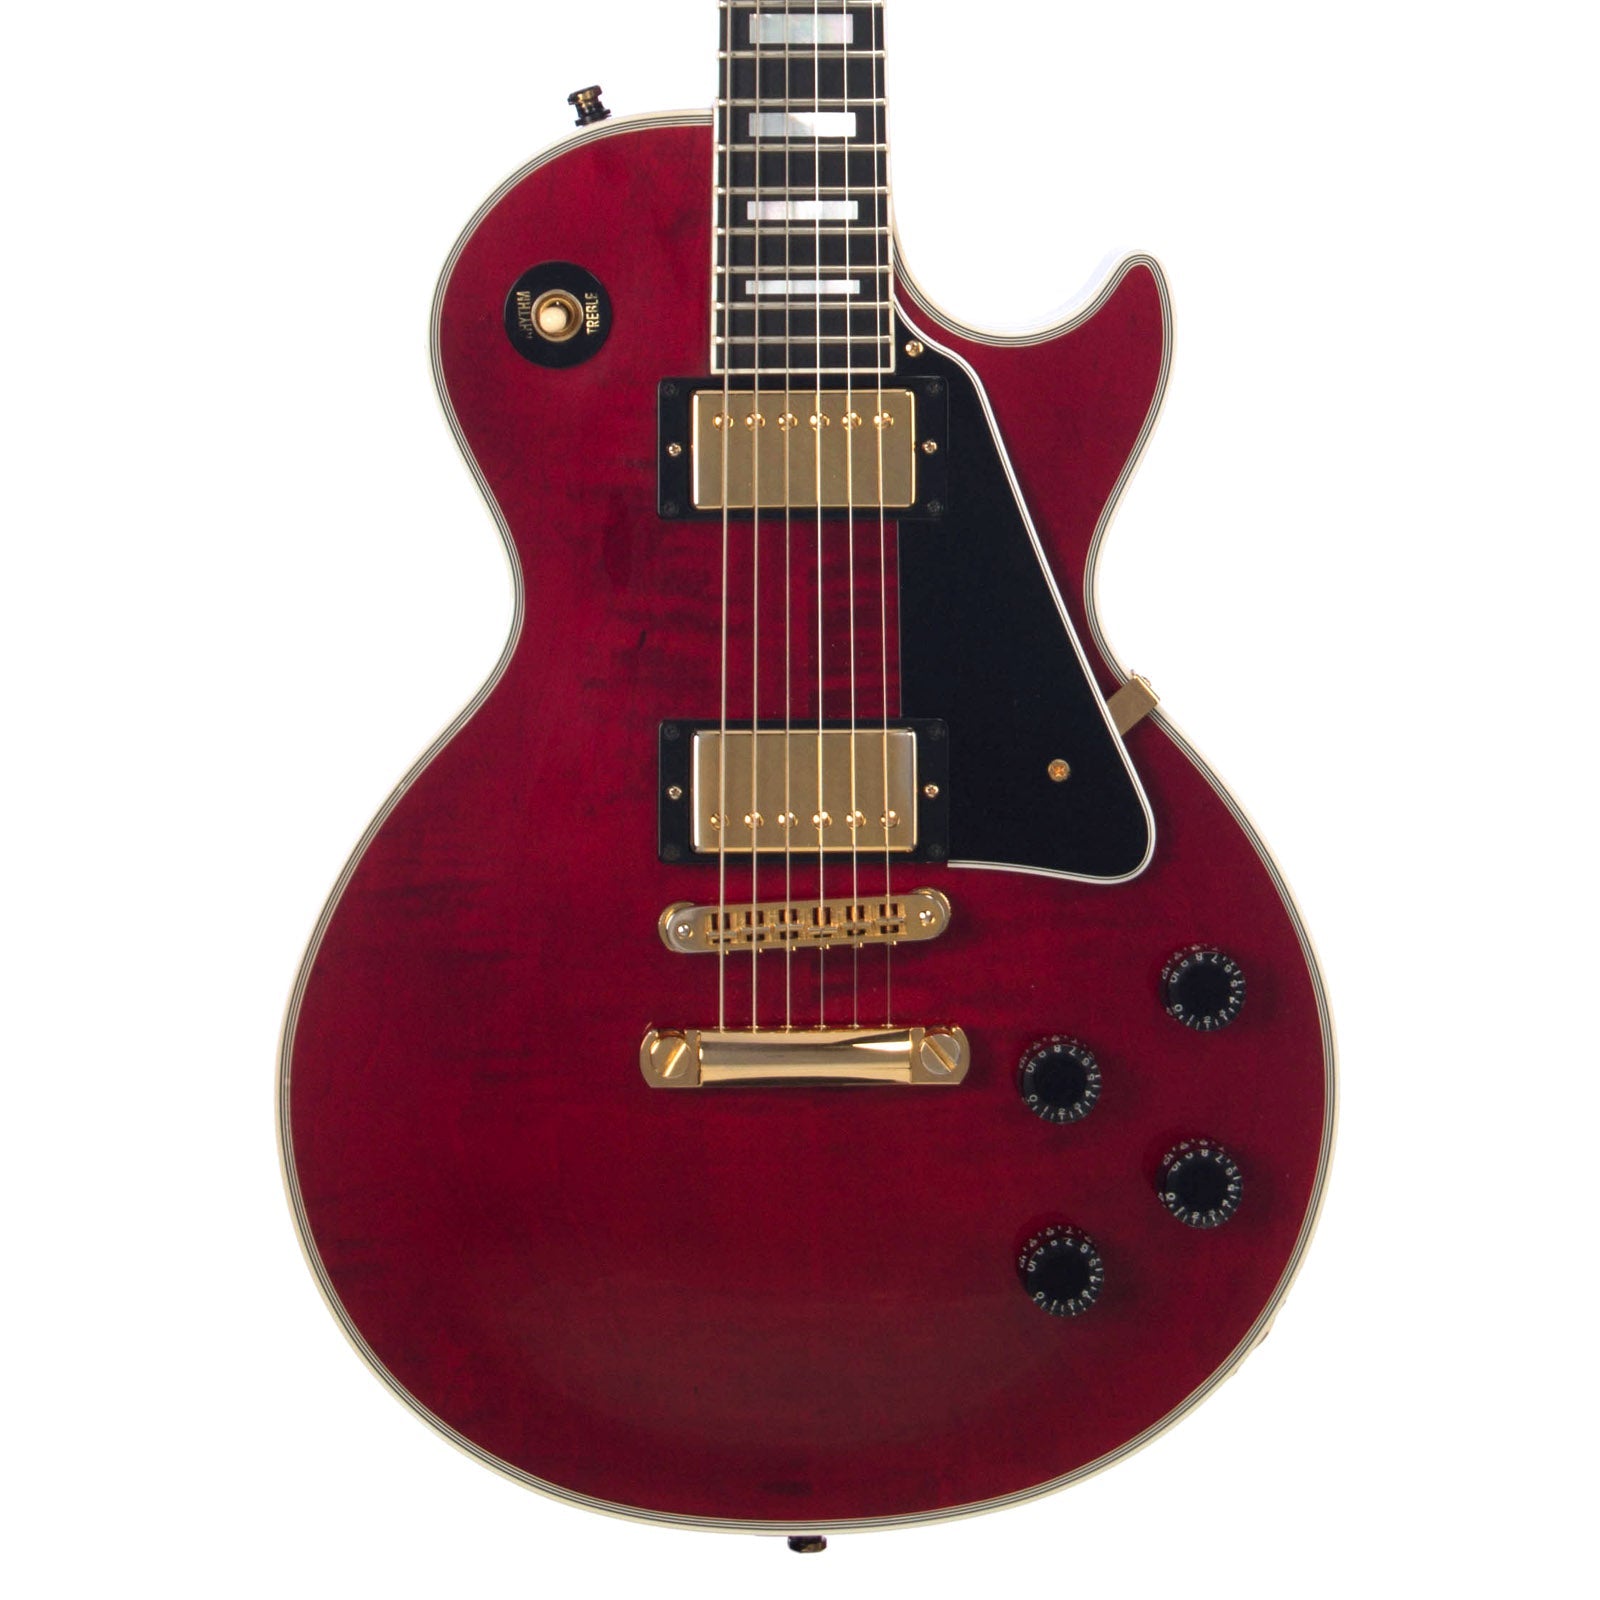 Gibson Custom Shop 1976 Les Paul Deluxe P90 Electric Guitar- Gloss Wine Red | Zoso Music Sdn Bhd